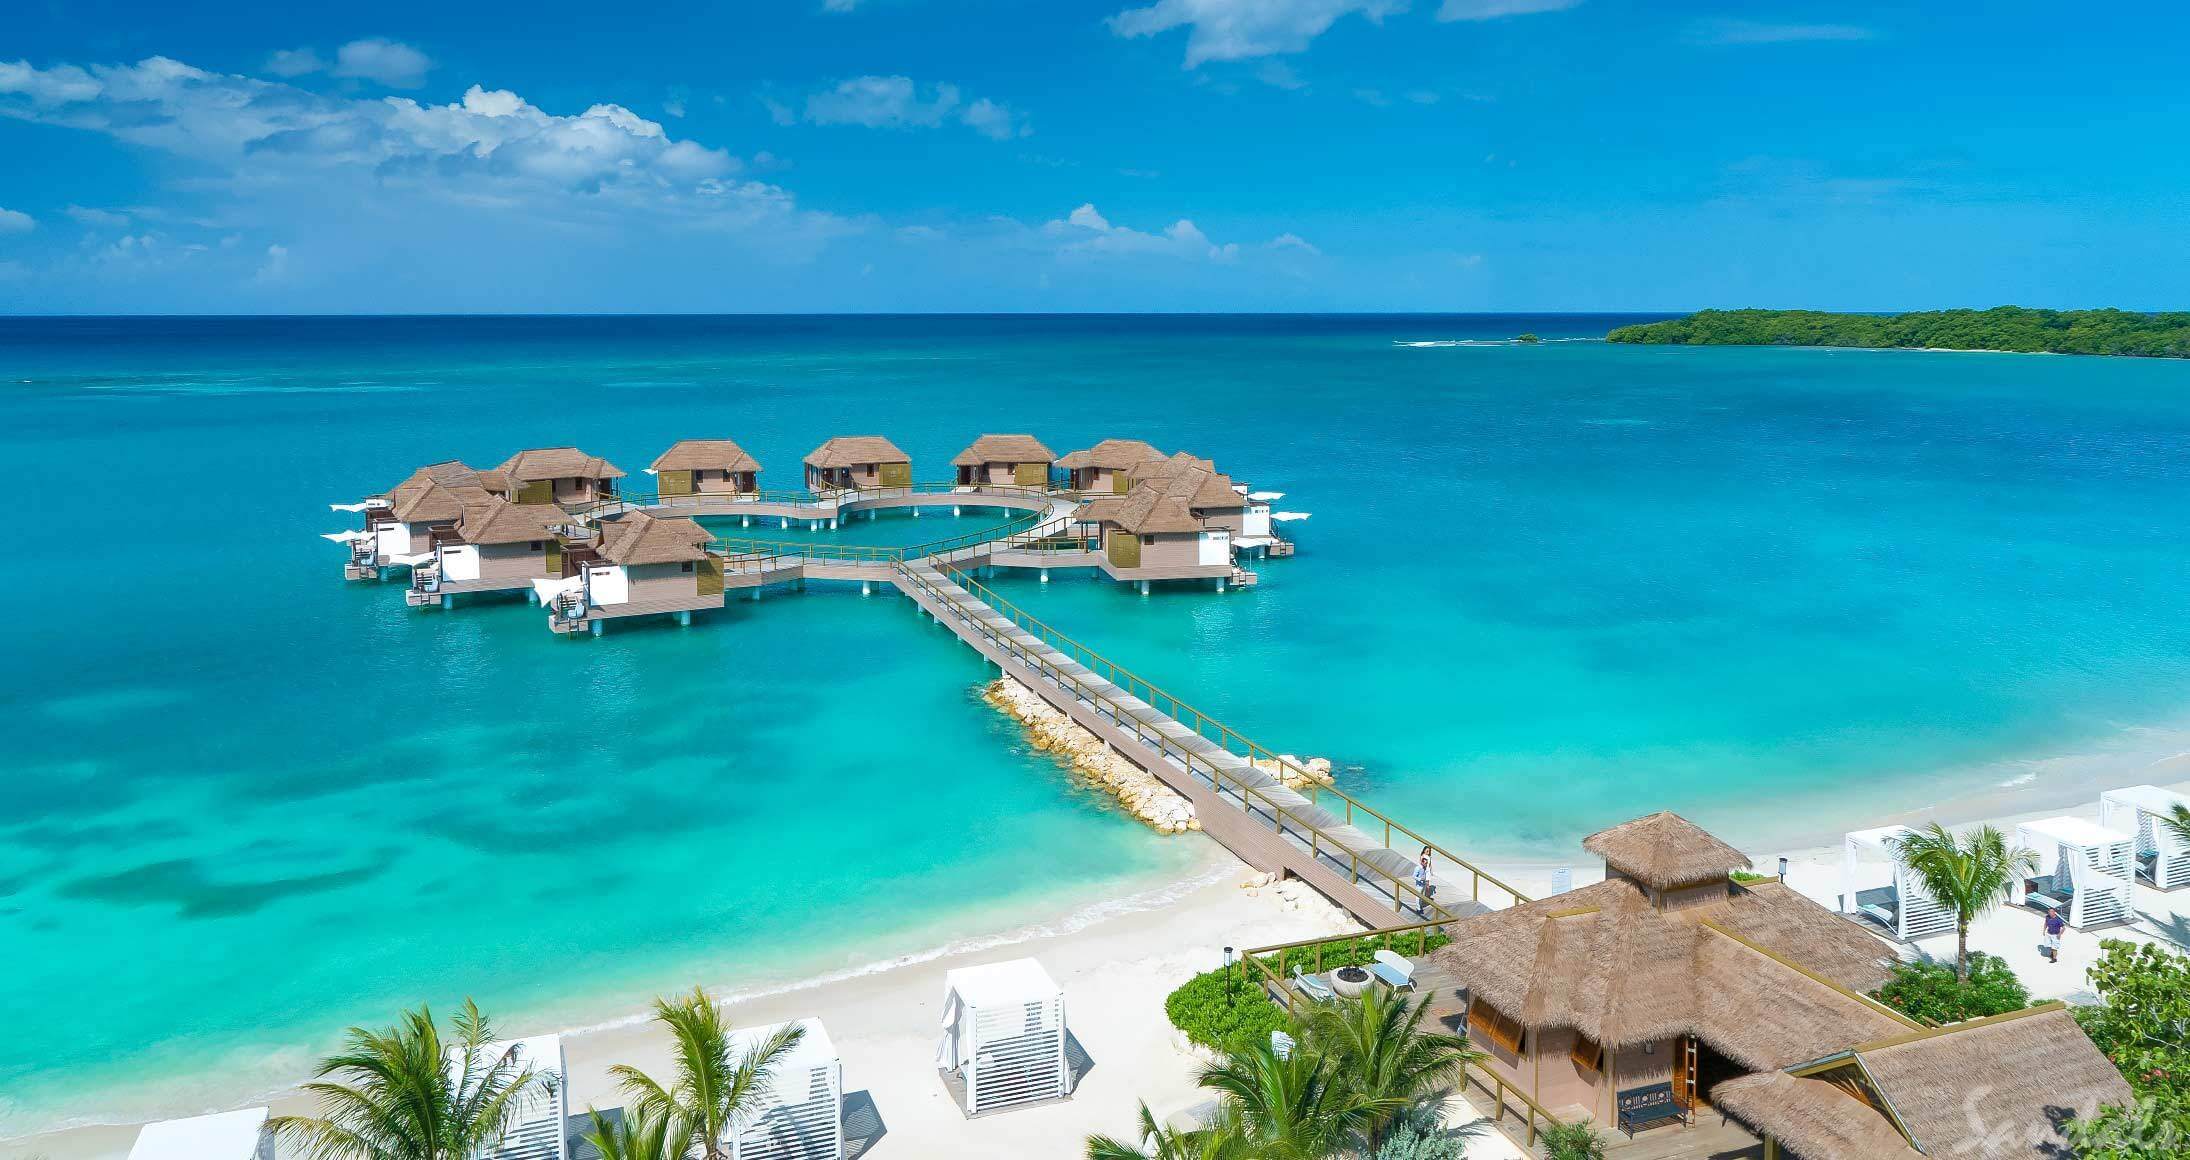 Overwater bungalows in the Caribbean at Sandals South Coast in Jamaica.